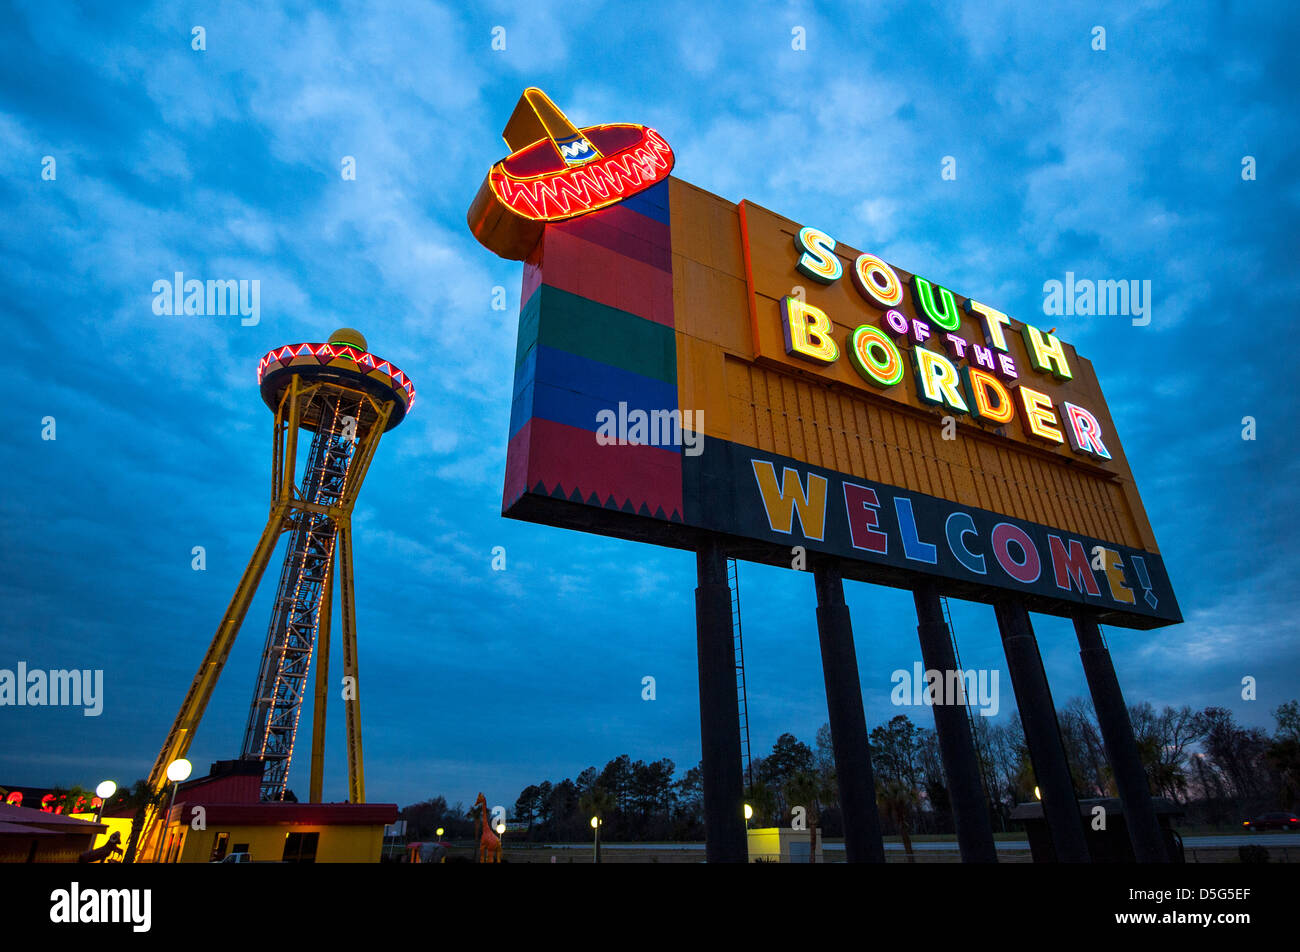 South of the Border lit up at night on interstate 95 in South Carolina Stock Photo